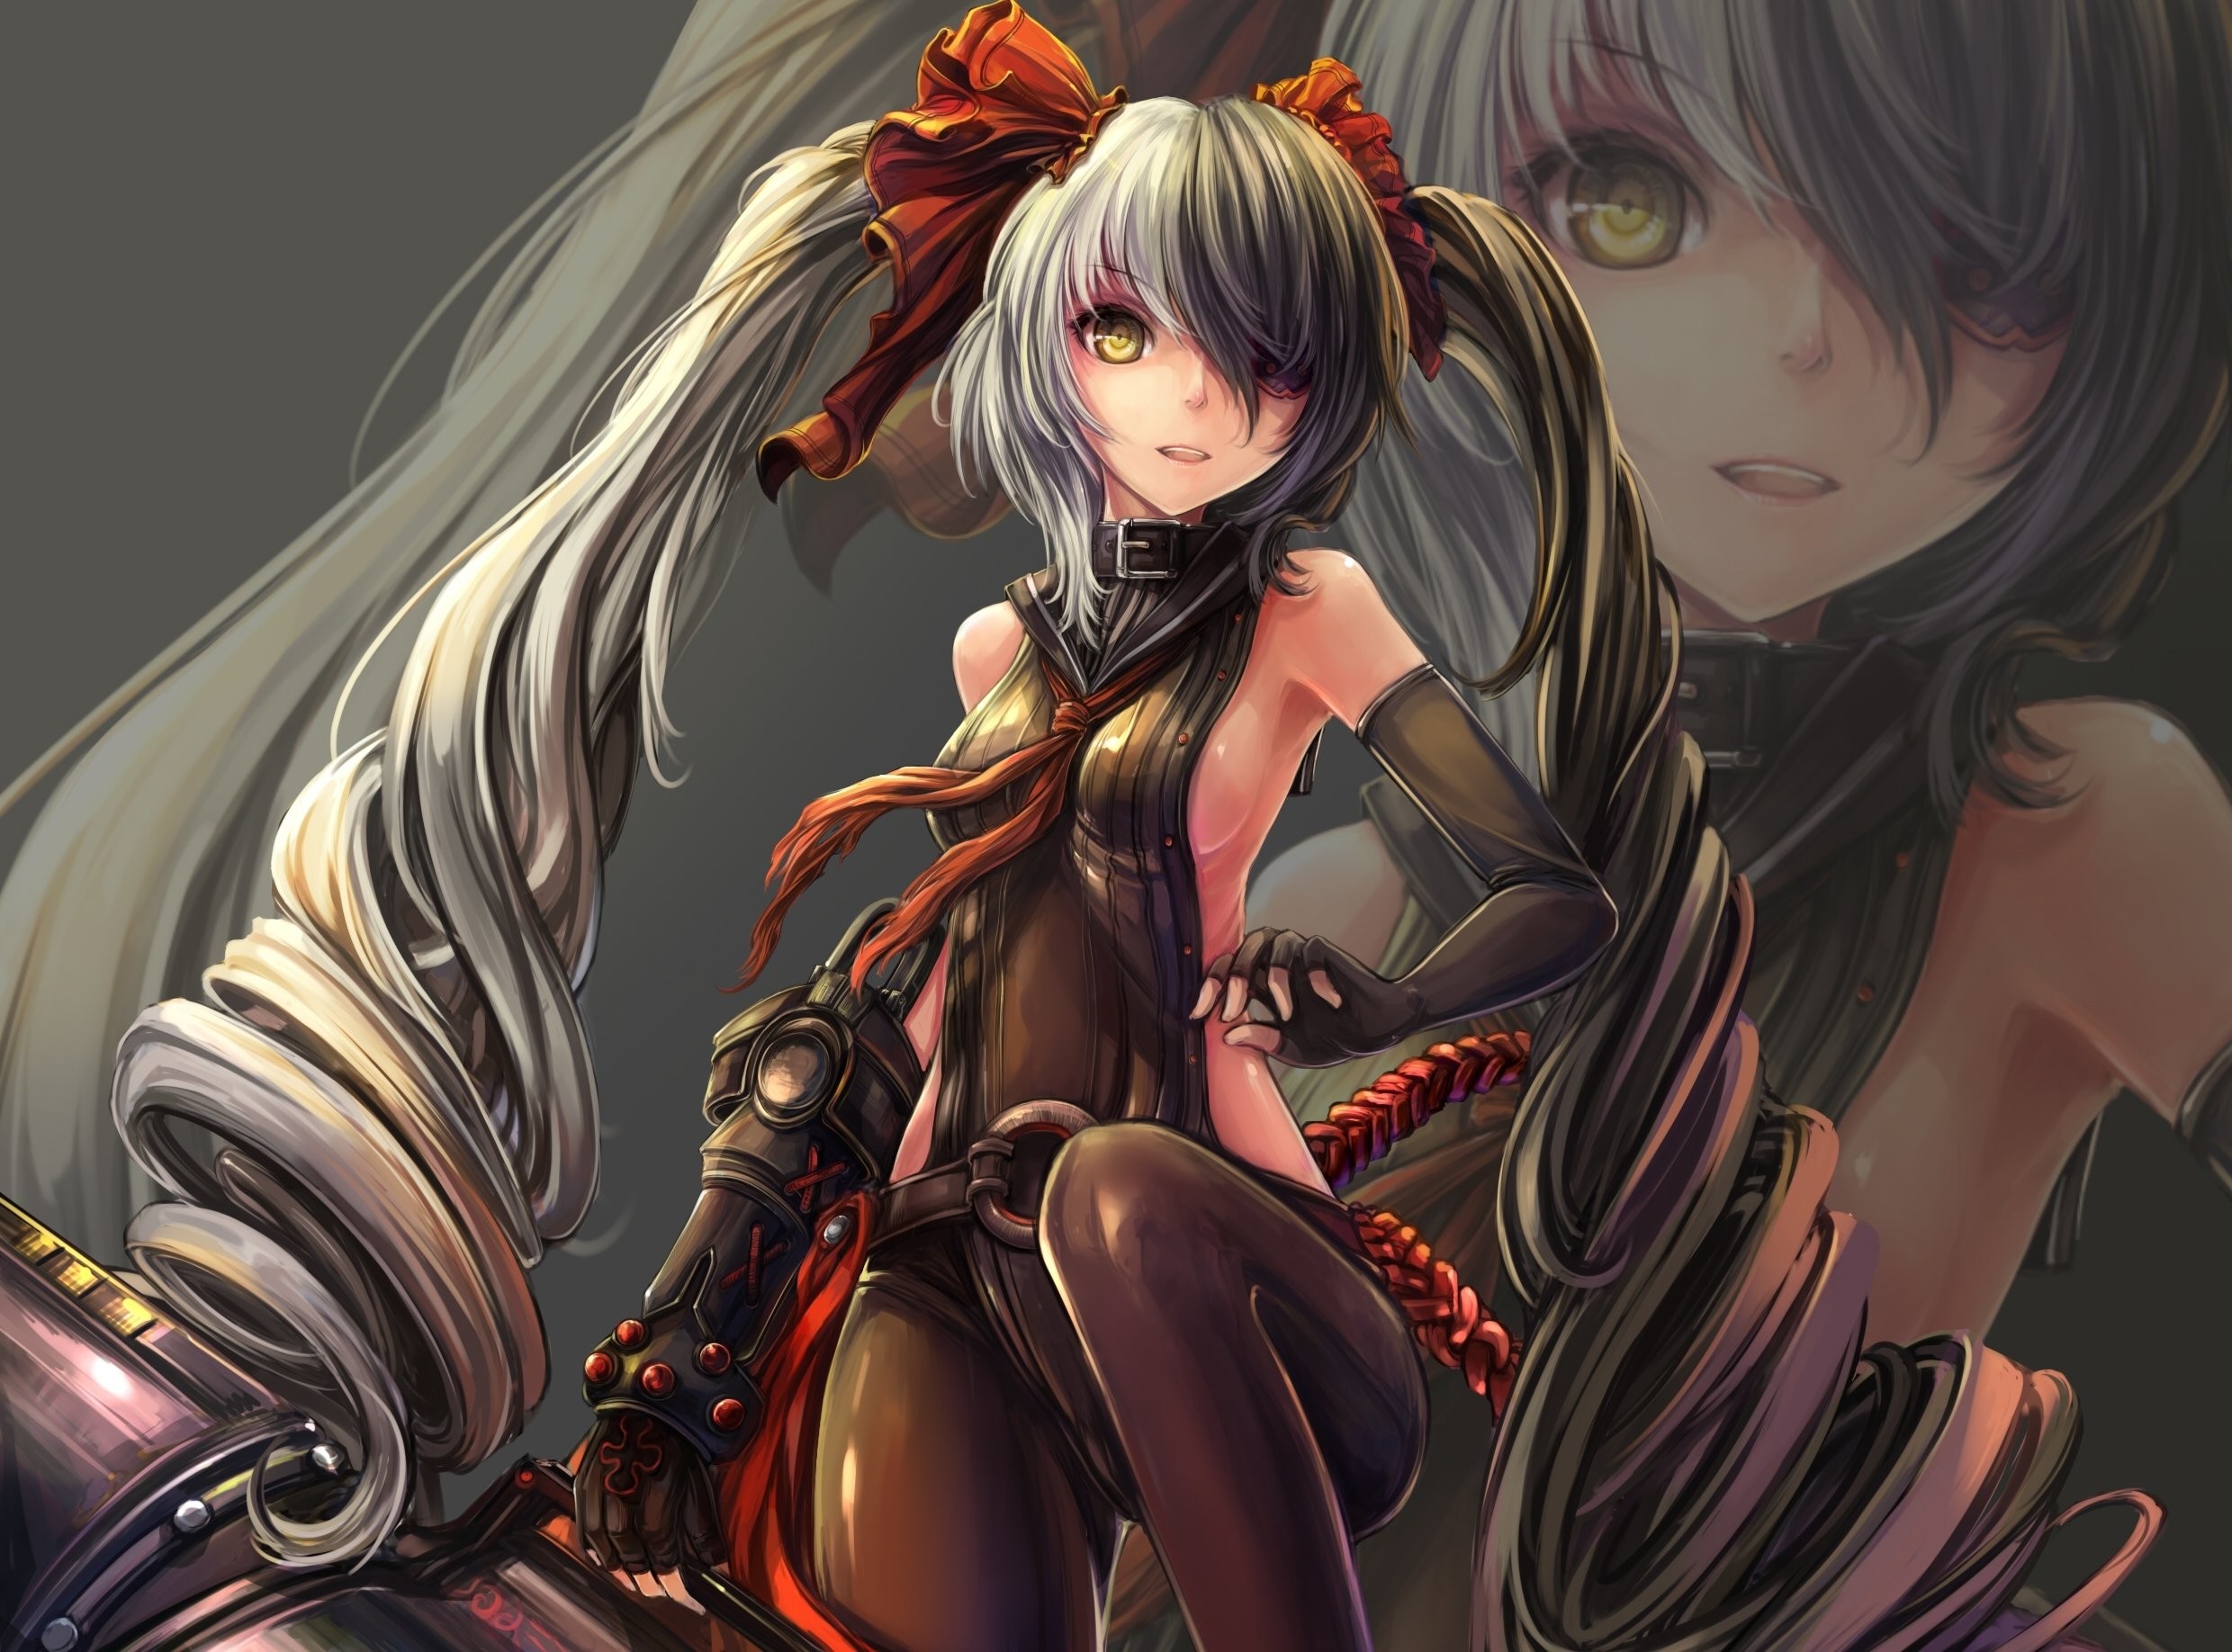 BLADE And SOUL asian martial arts action fighting 1blades online mmo rpg  Beulleideu aen anime fantasy perfect wallpaper | | 679610 |  WallpaperUP